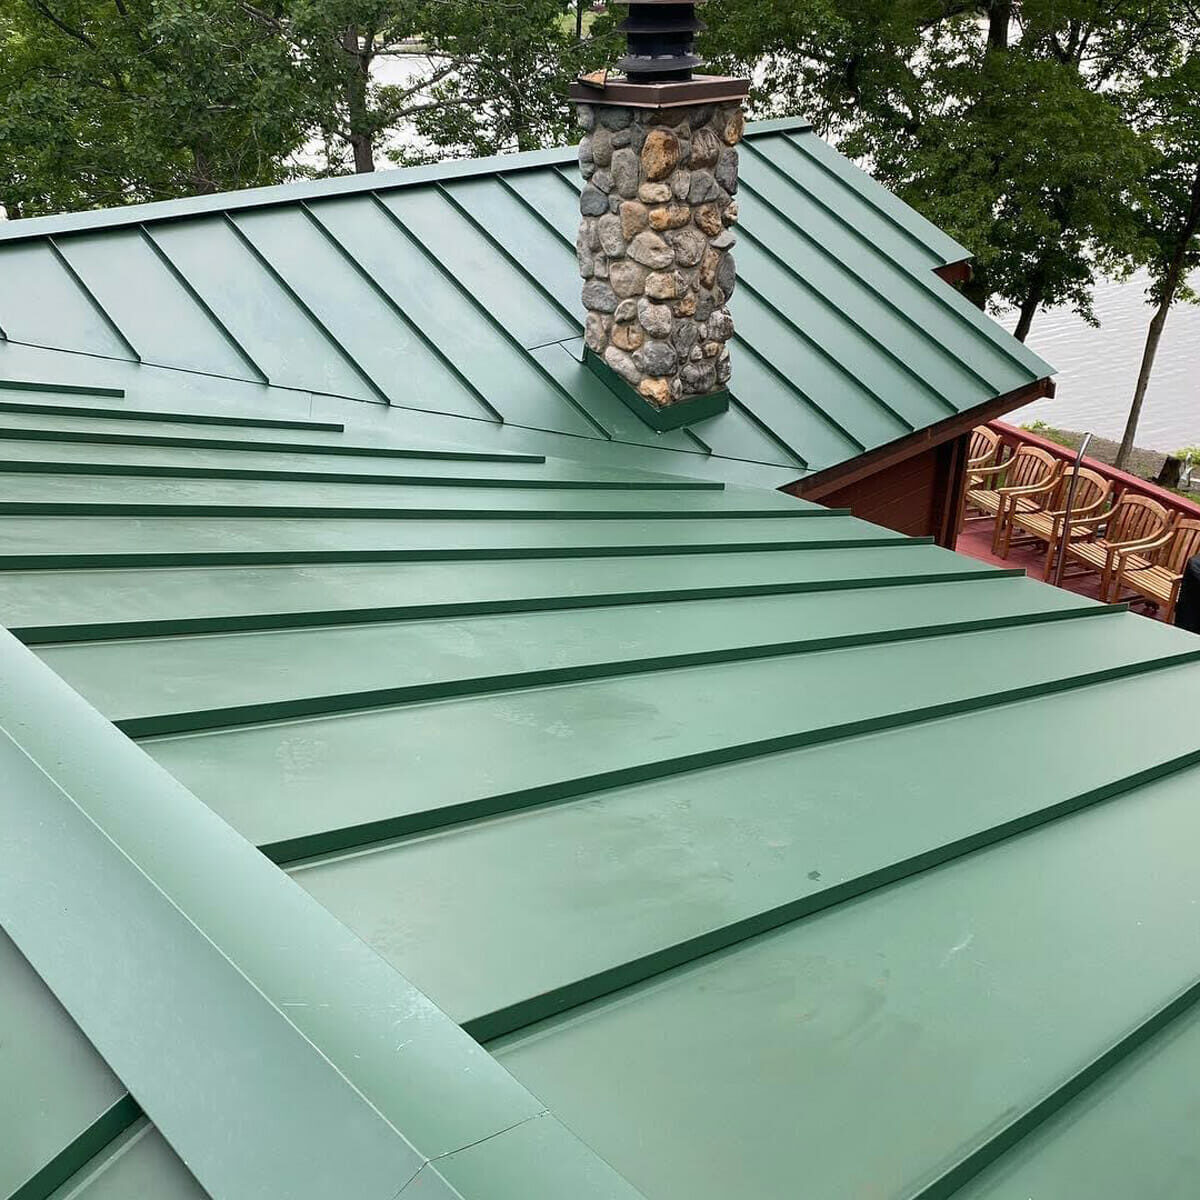 Home in New York with Metal Roof